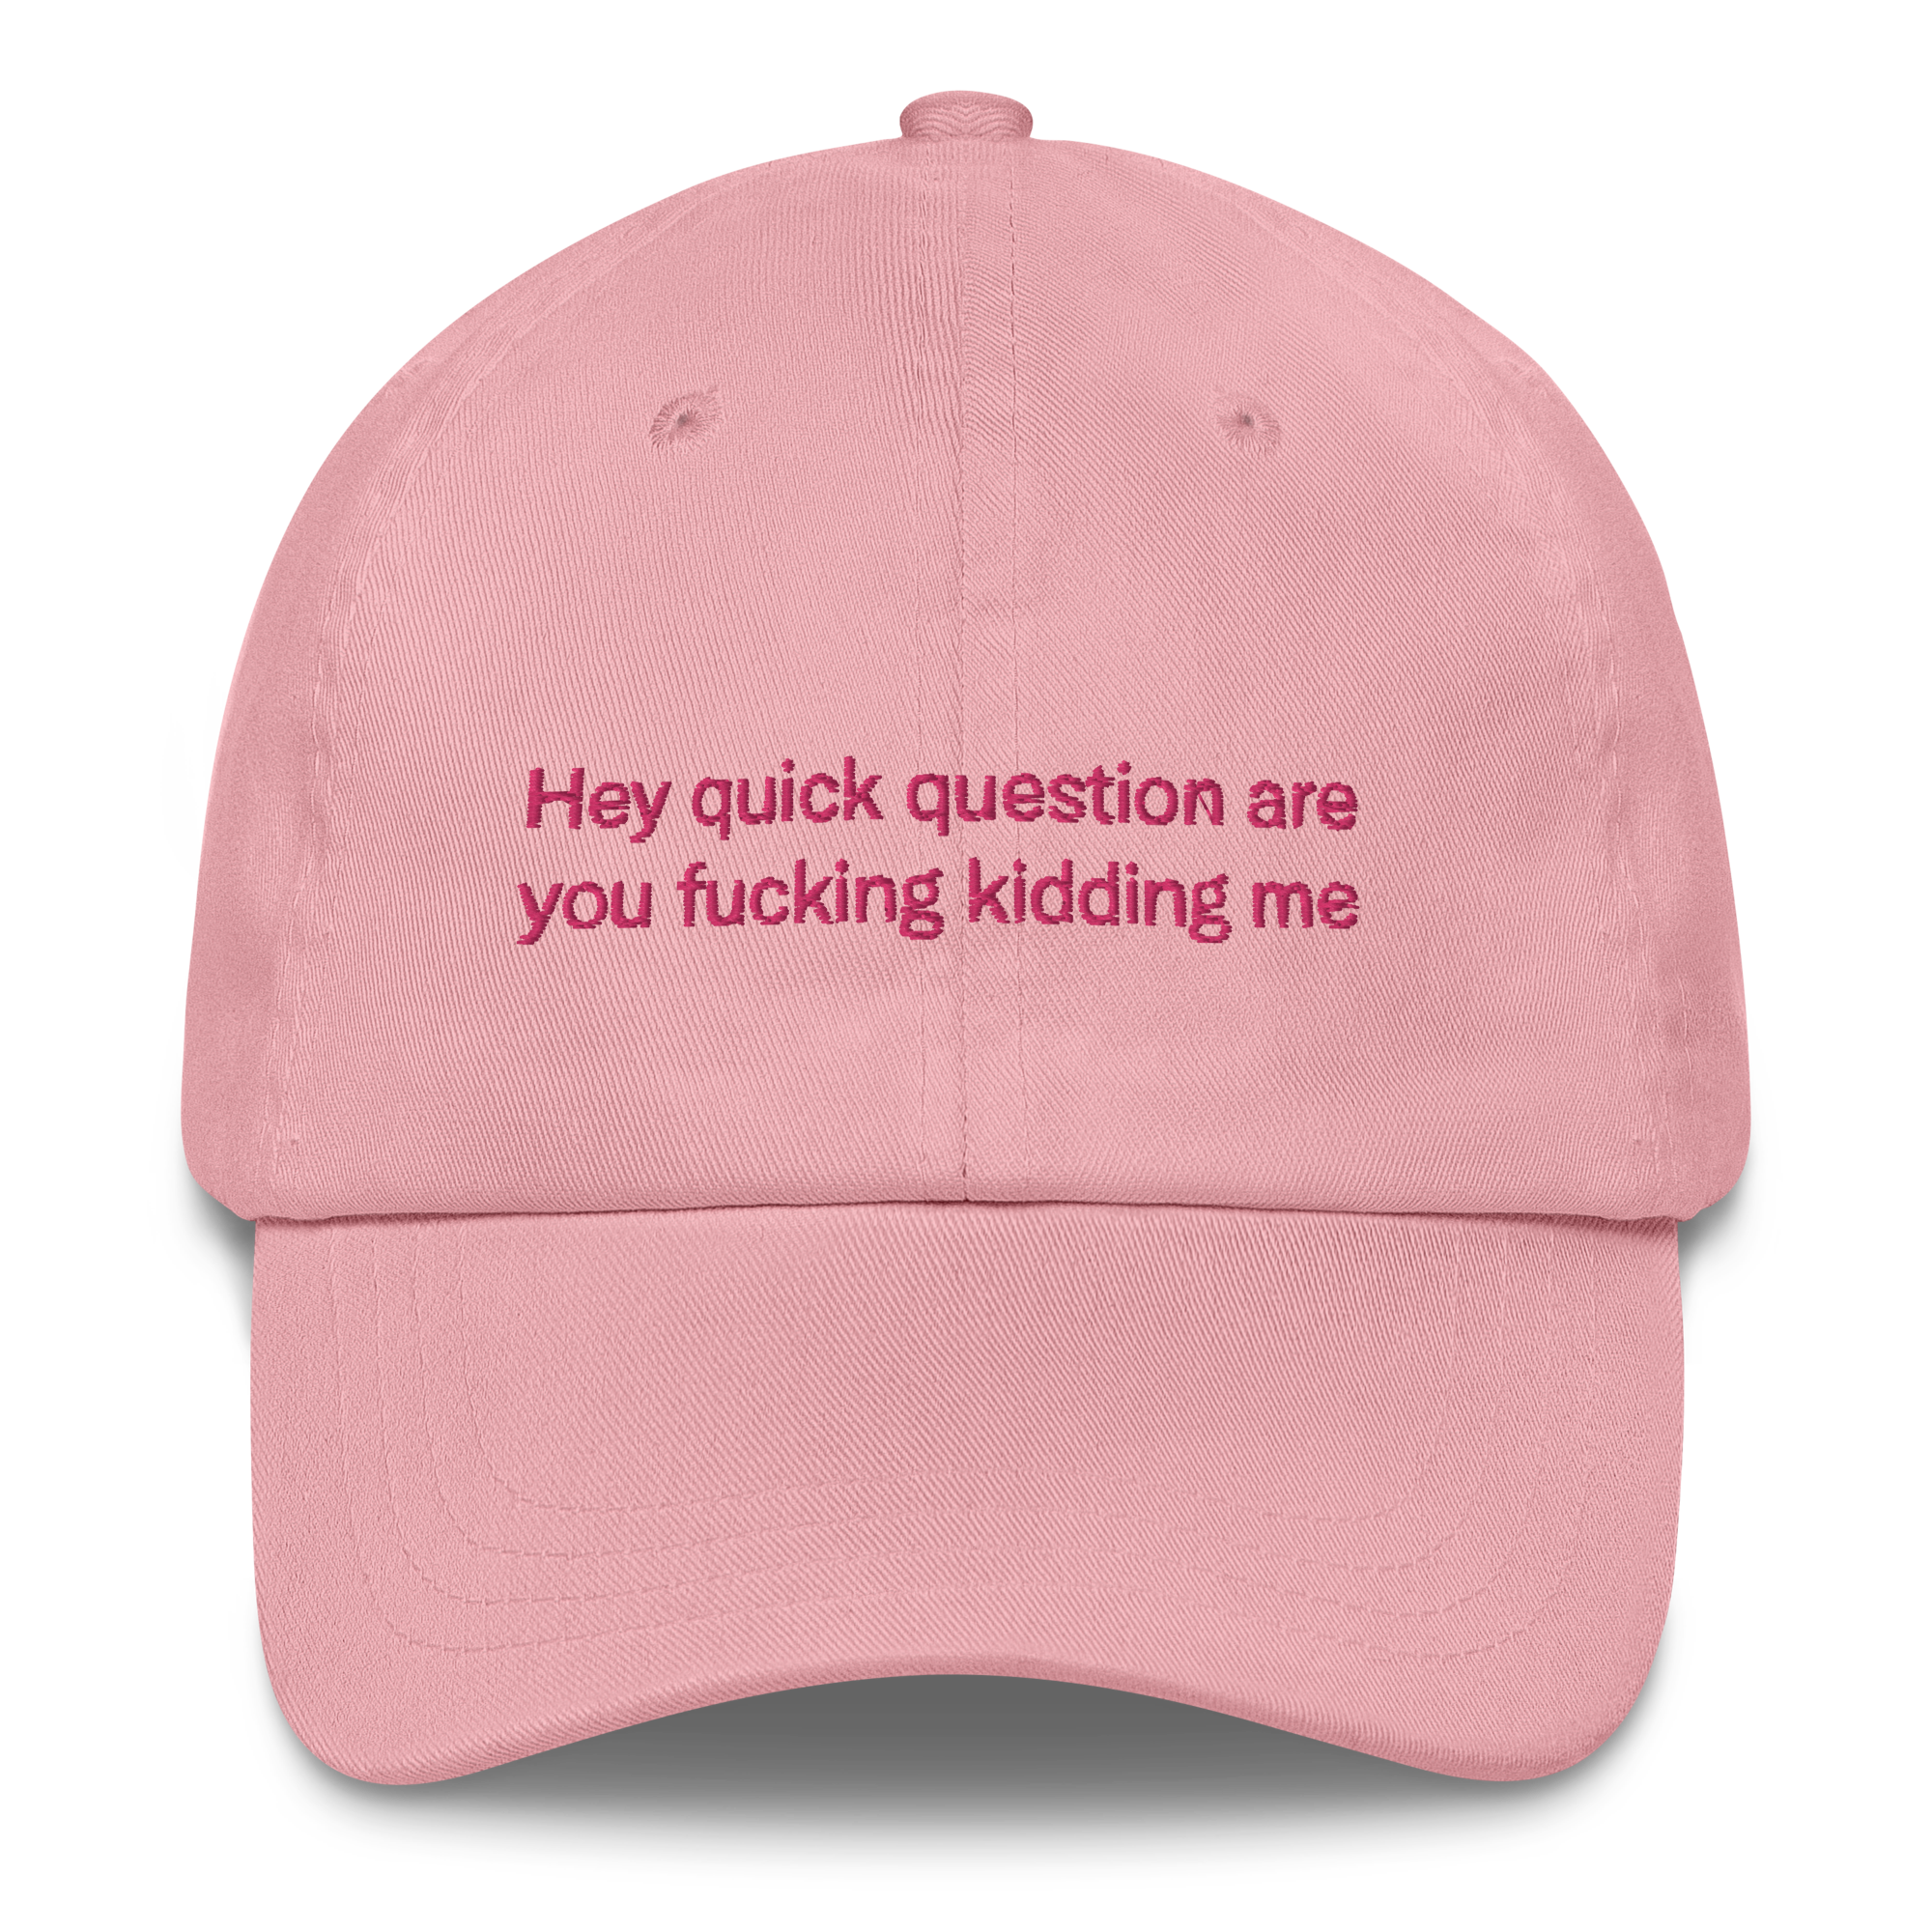 classic-dad-hat-pink-front-6679e42b35649.png